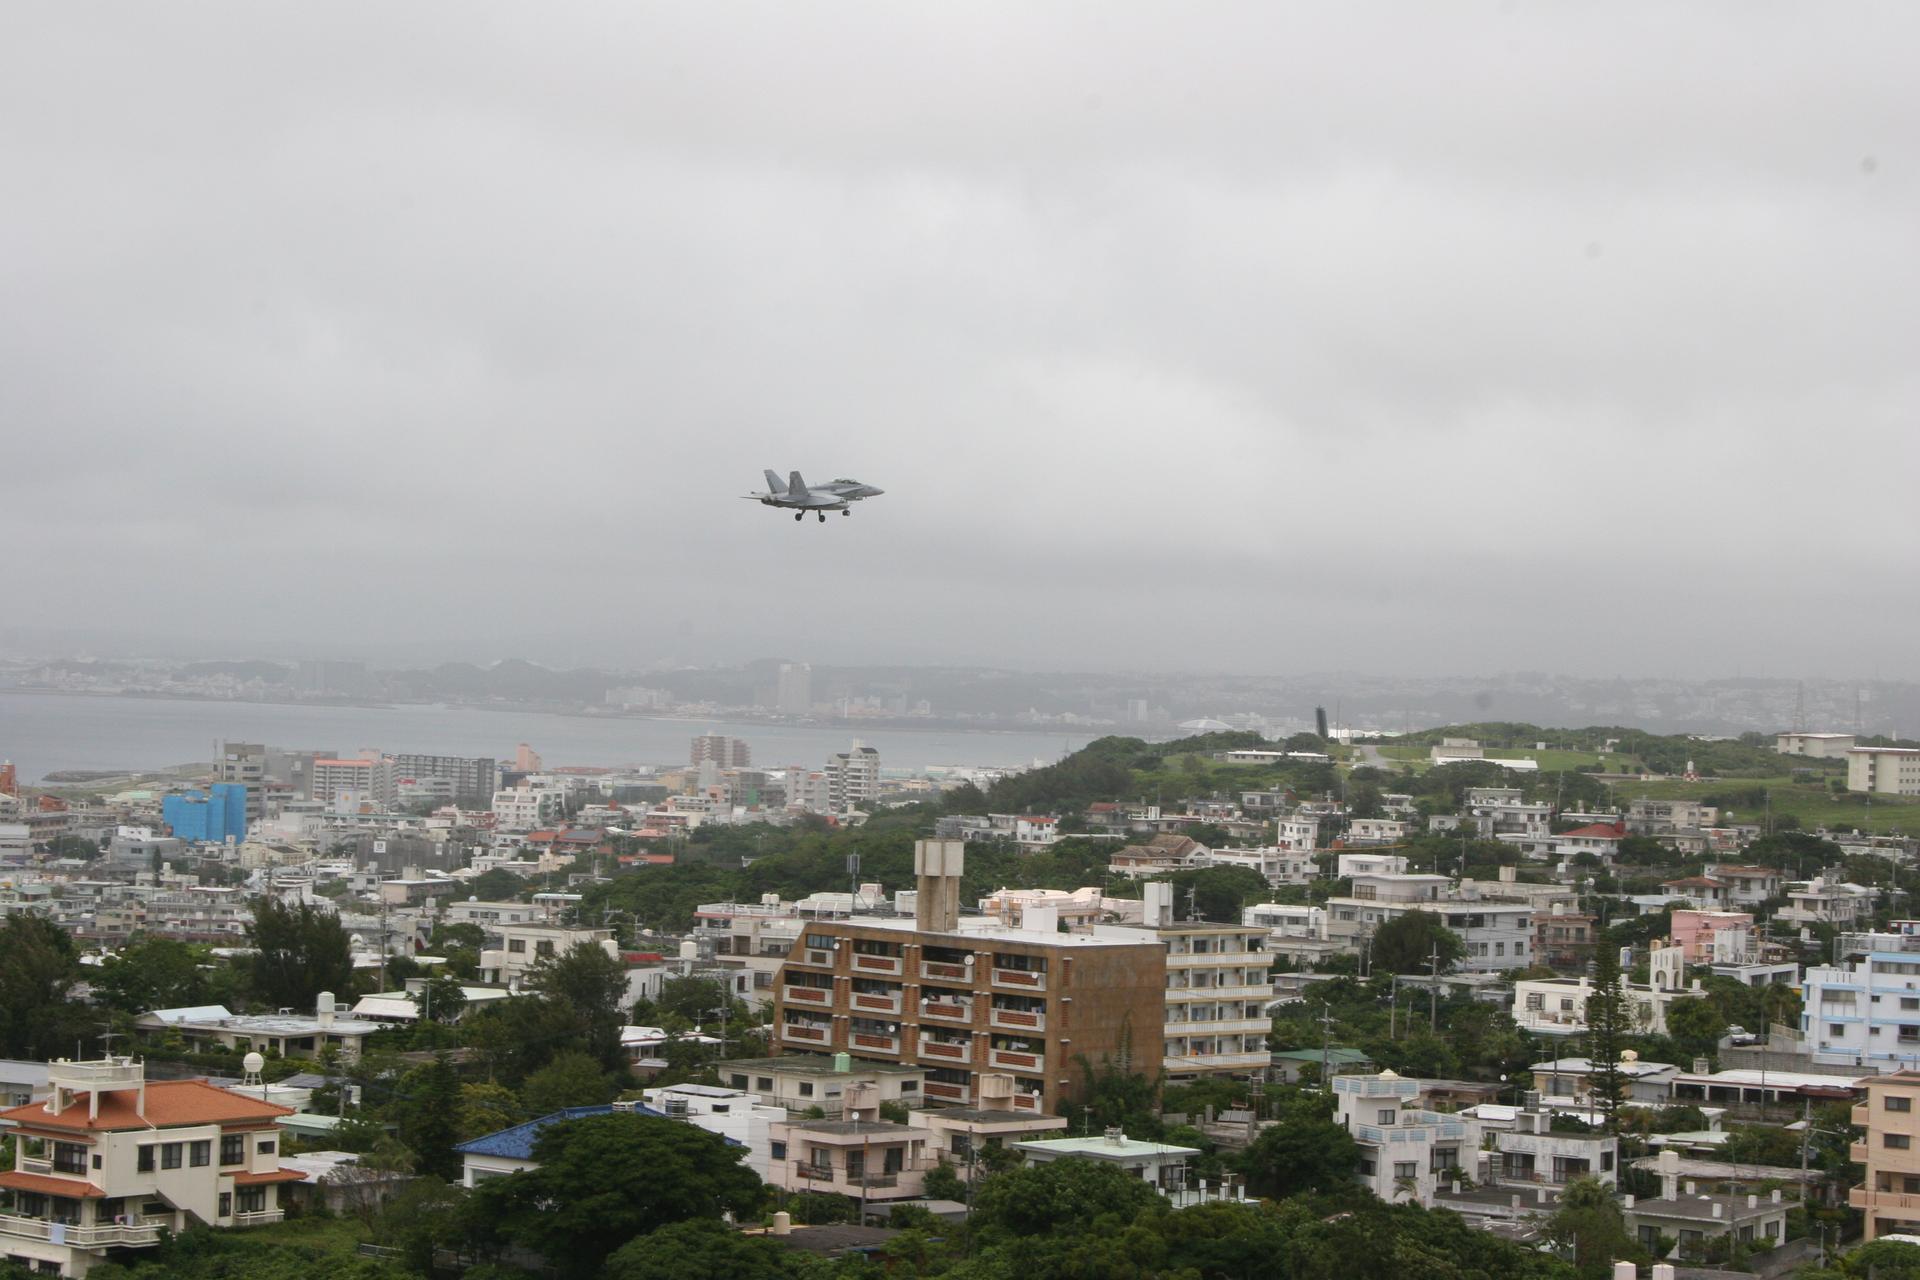 A US military aircraft prepares to land on a runway at the Futenma military base, adjacent to a densely populated city on Okinawa island.